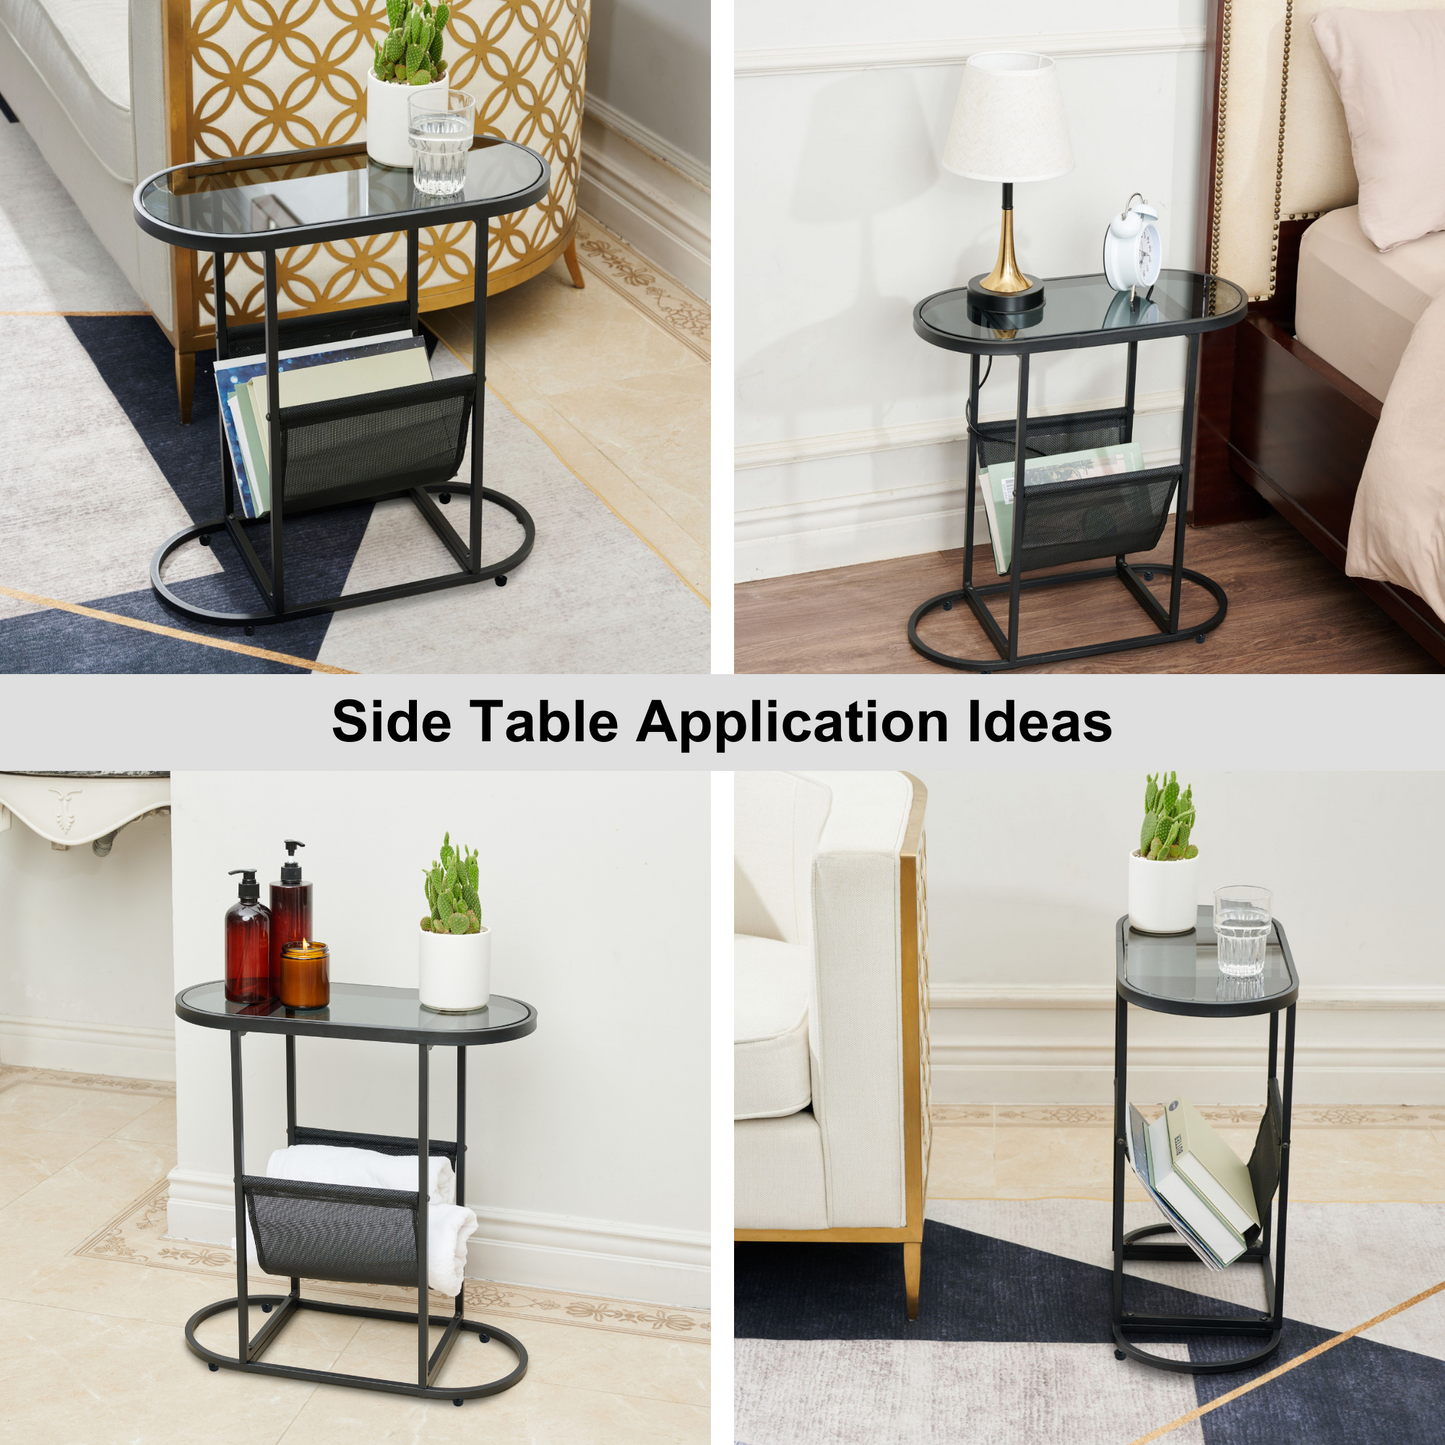 Glass Oval Small Side Tables Living Room Small Space With Magazines Organizer Storage Space